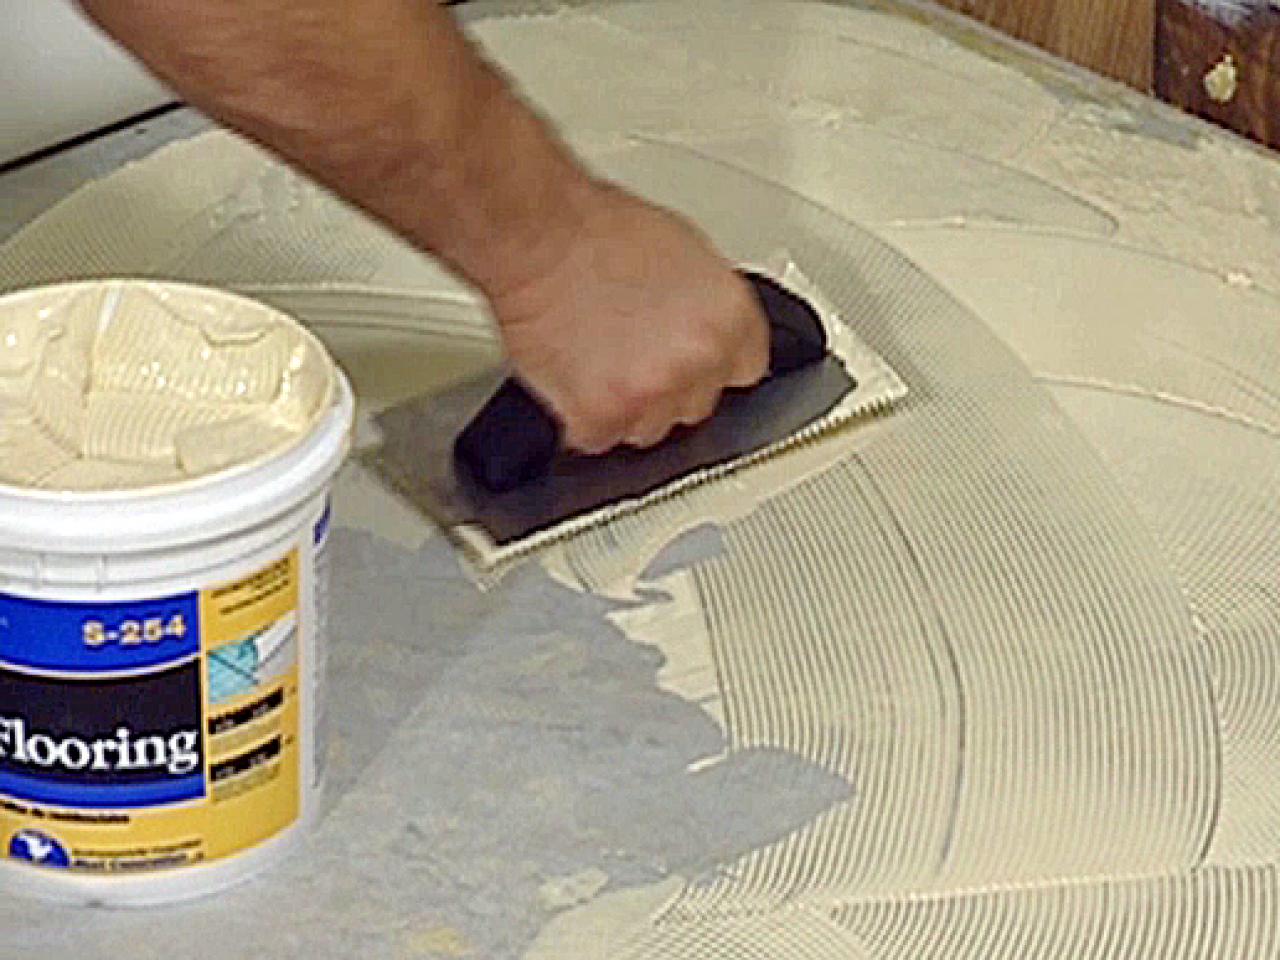 How To Remove And Add Vinyl Flooring, How To Re Glue Vinyl Flooring